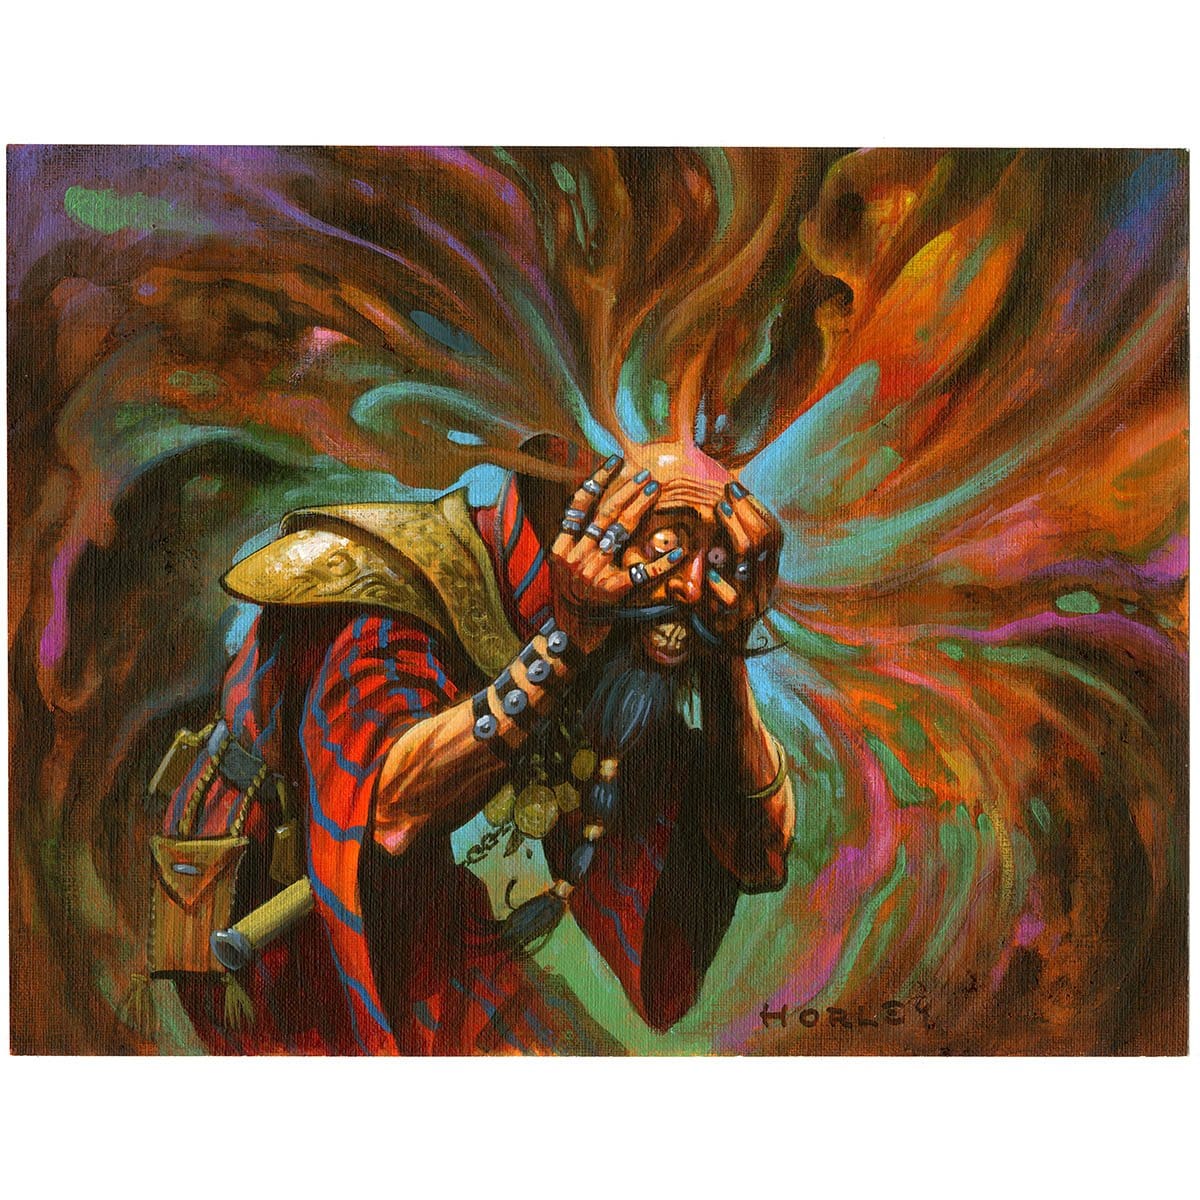 Mindmoil Print - Print - Original Magic Art - Accessories for Magic the Gathering and other card games